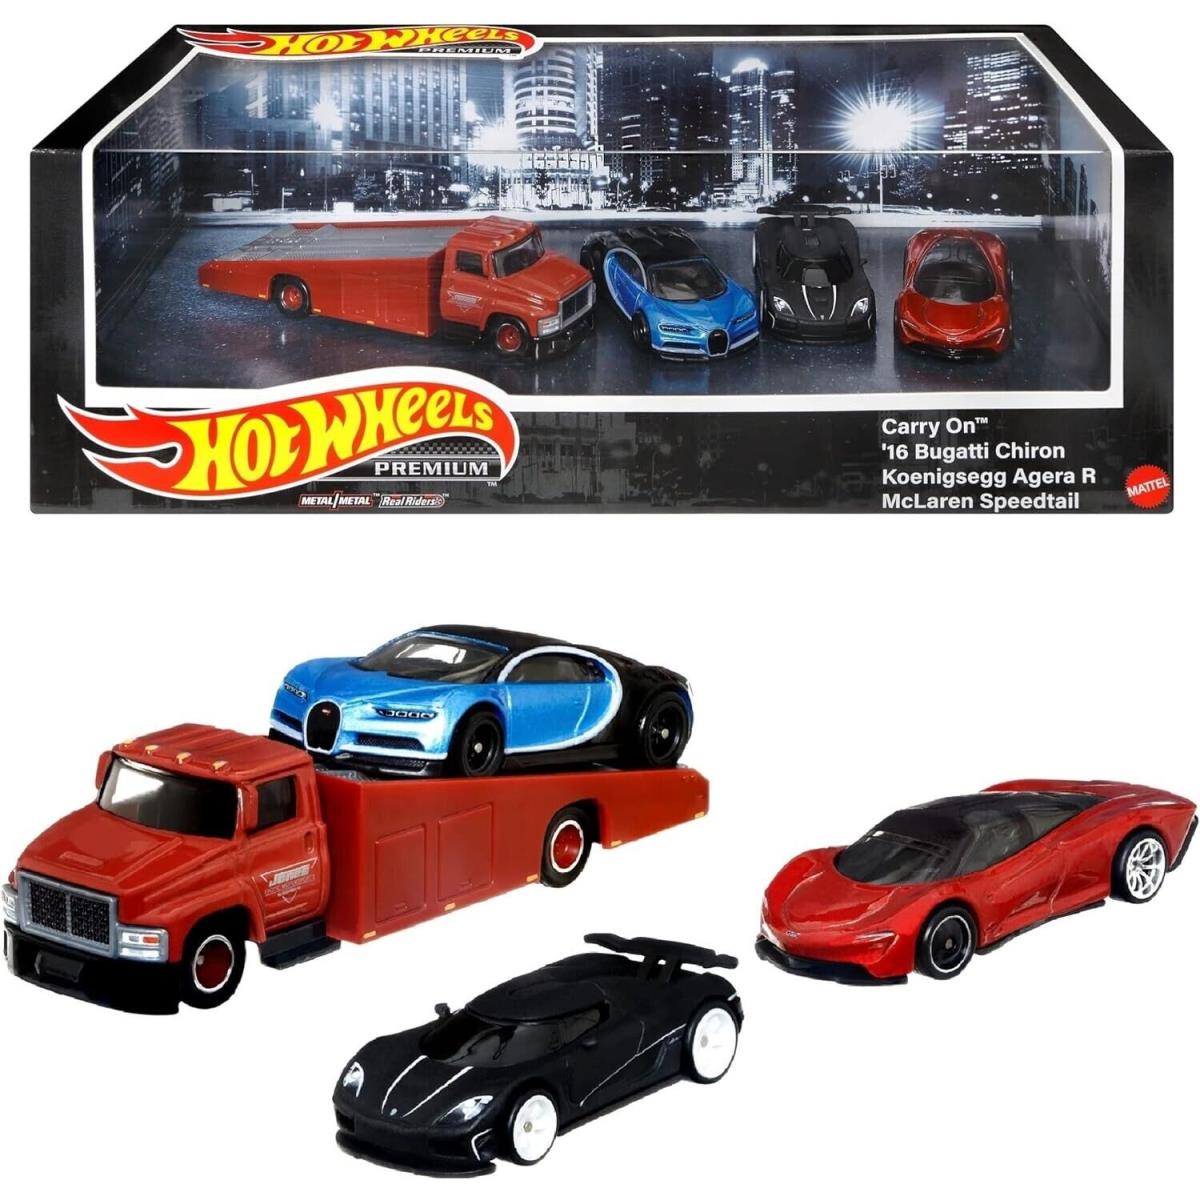 Hot Wheels Premium Collect Display Sets with 3 Cars 1 Team Transport Vehicle